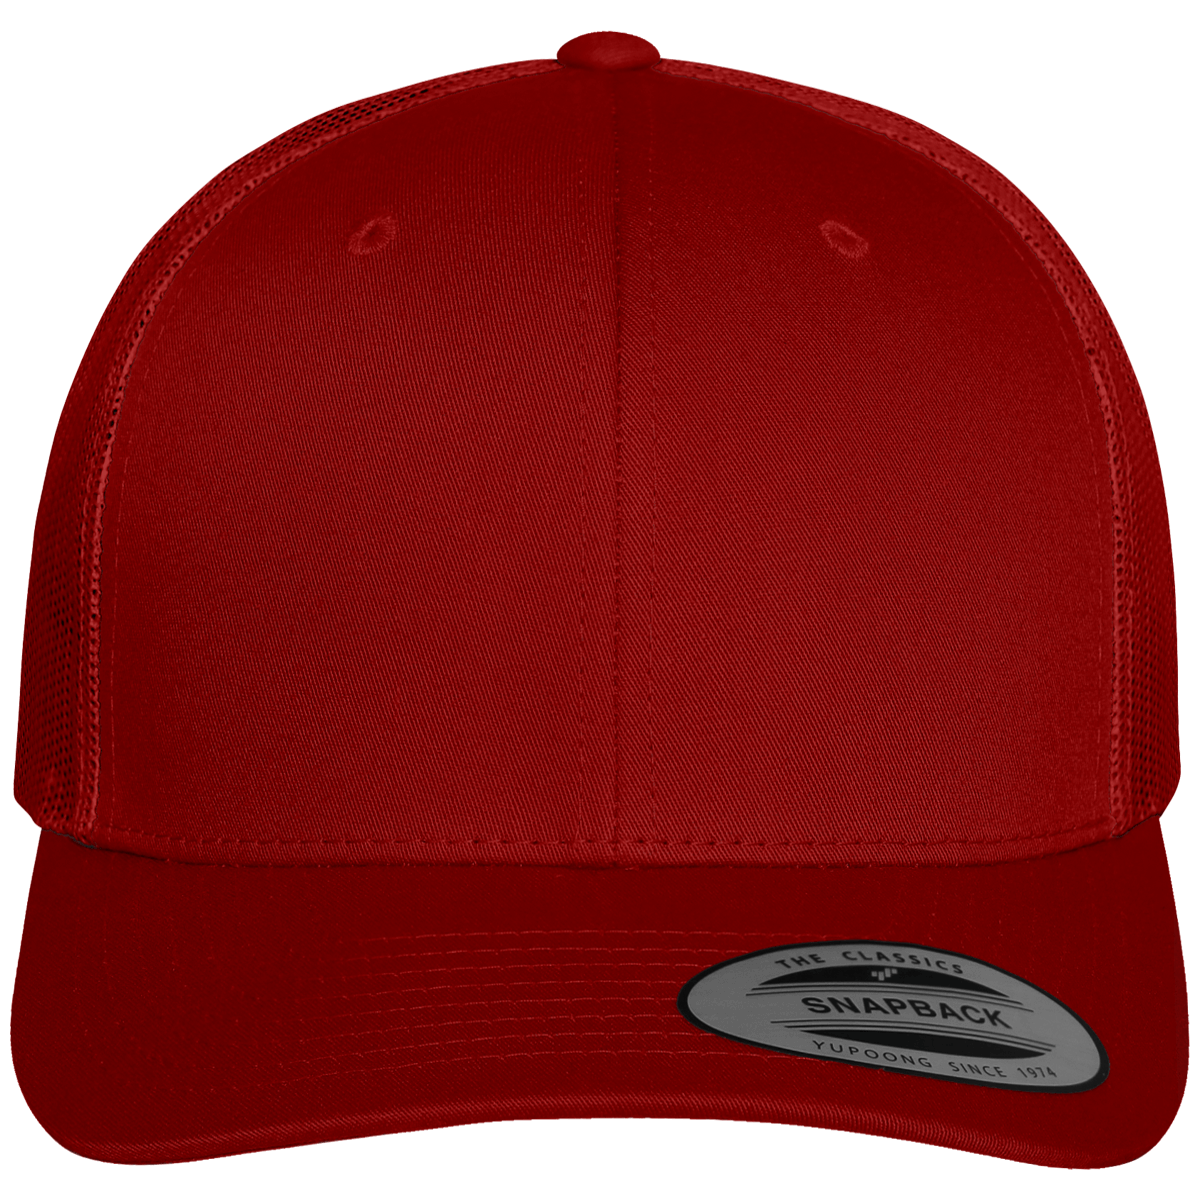 Casquette Vintage Personnalisable En Broderie  Red / Red